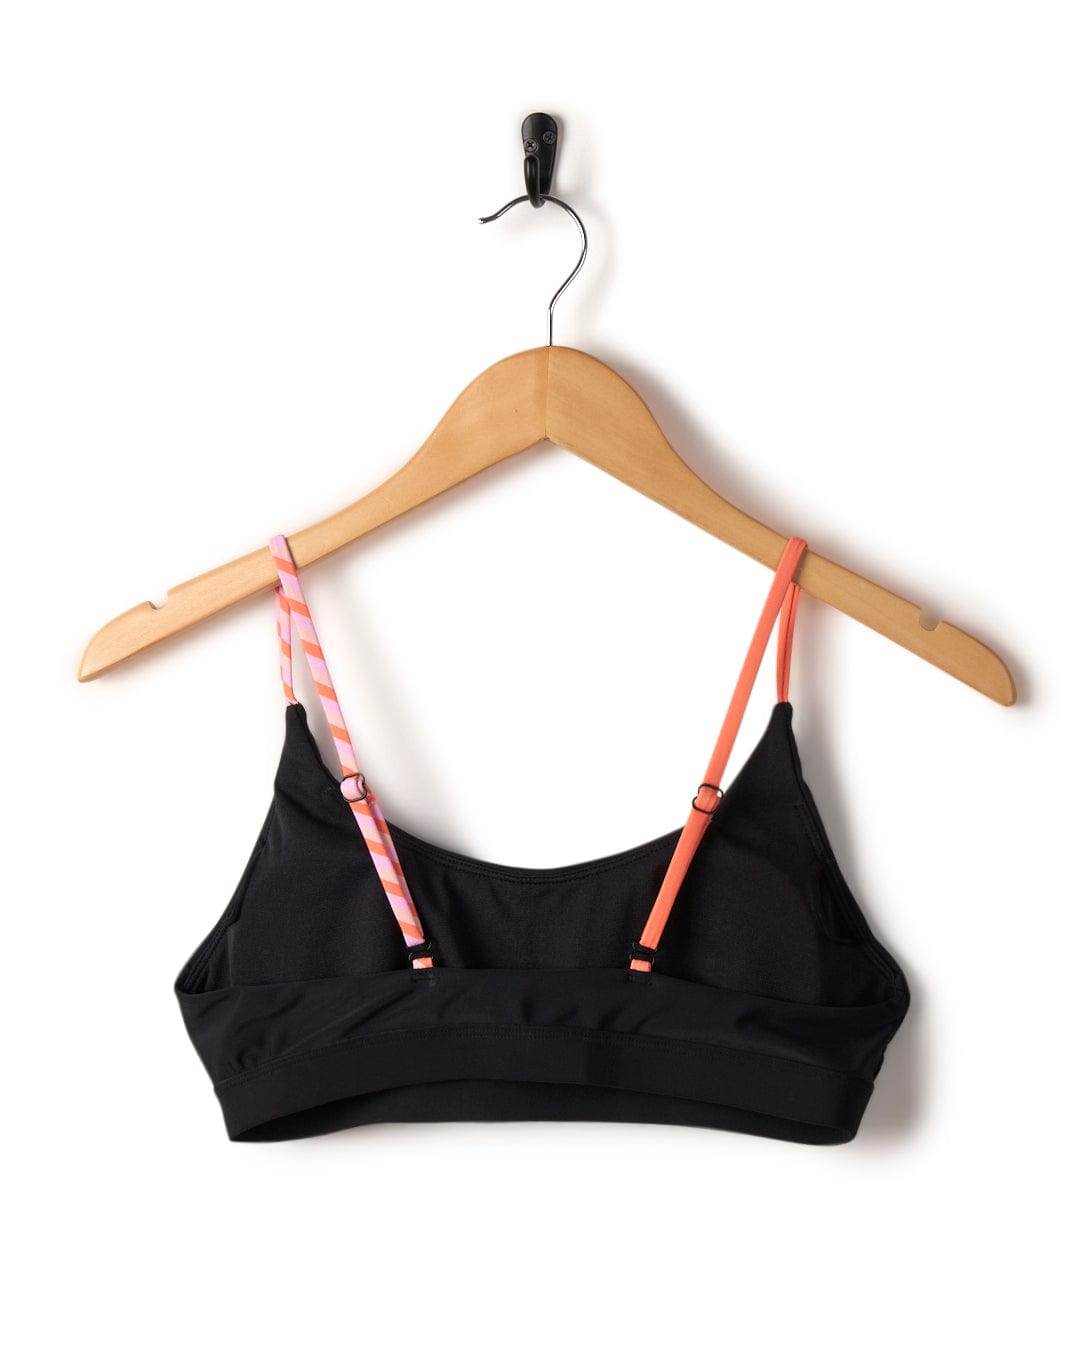 Black Cleo - Recycled Womens Retro Bikini Top with adjustable straps hanging on a wooden hanger, featuring pink and white striped straps, isolated on a white background. Brand: Saltrock